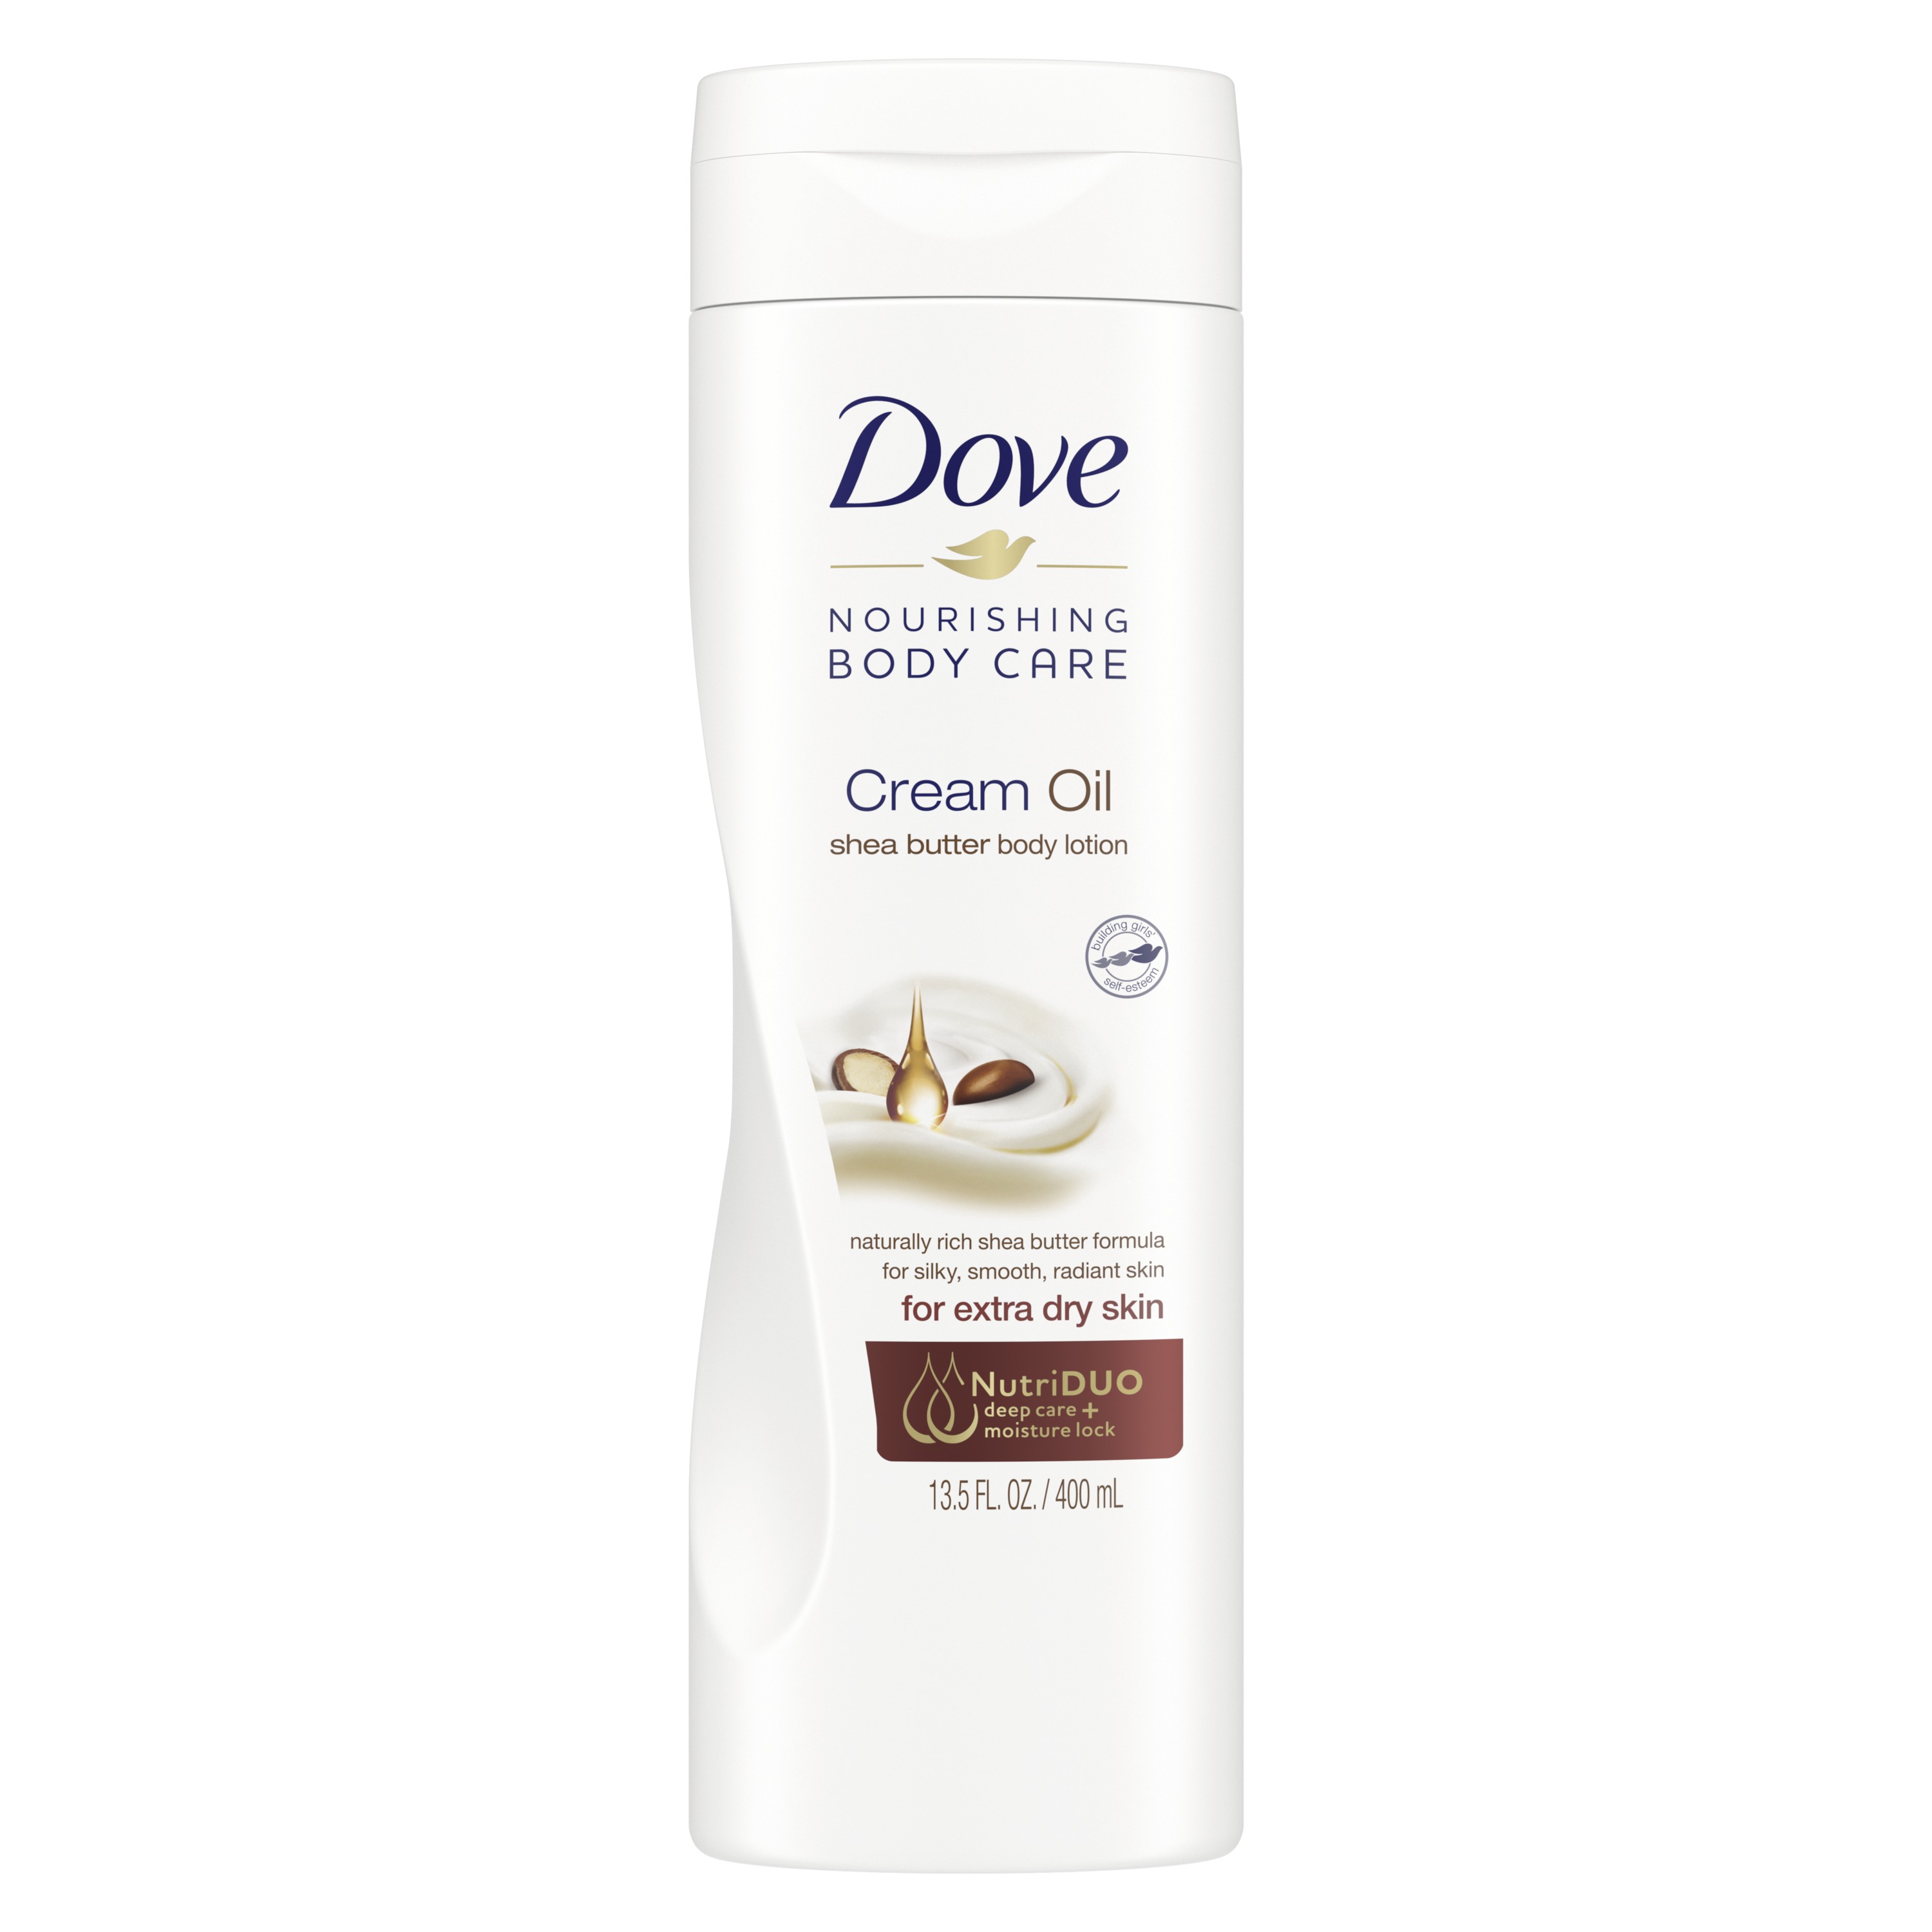 Dove Body Lotion Shea Butter 13.5 oz - image 2 of 9